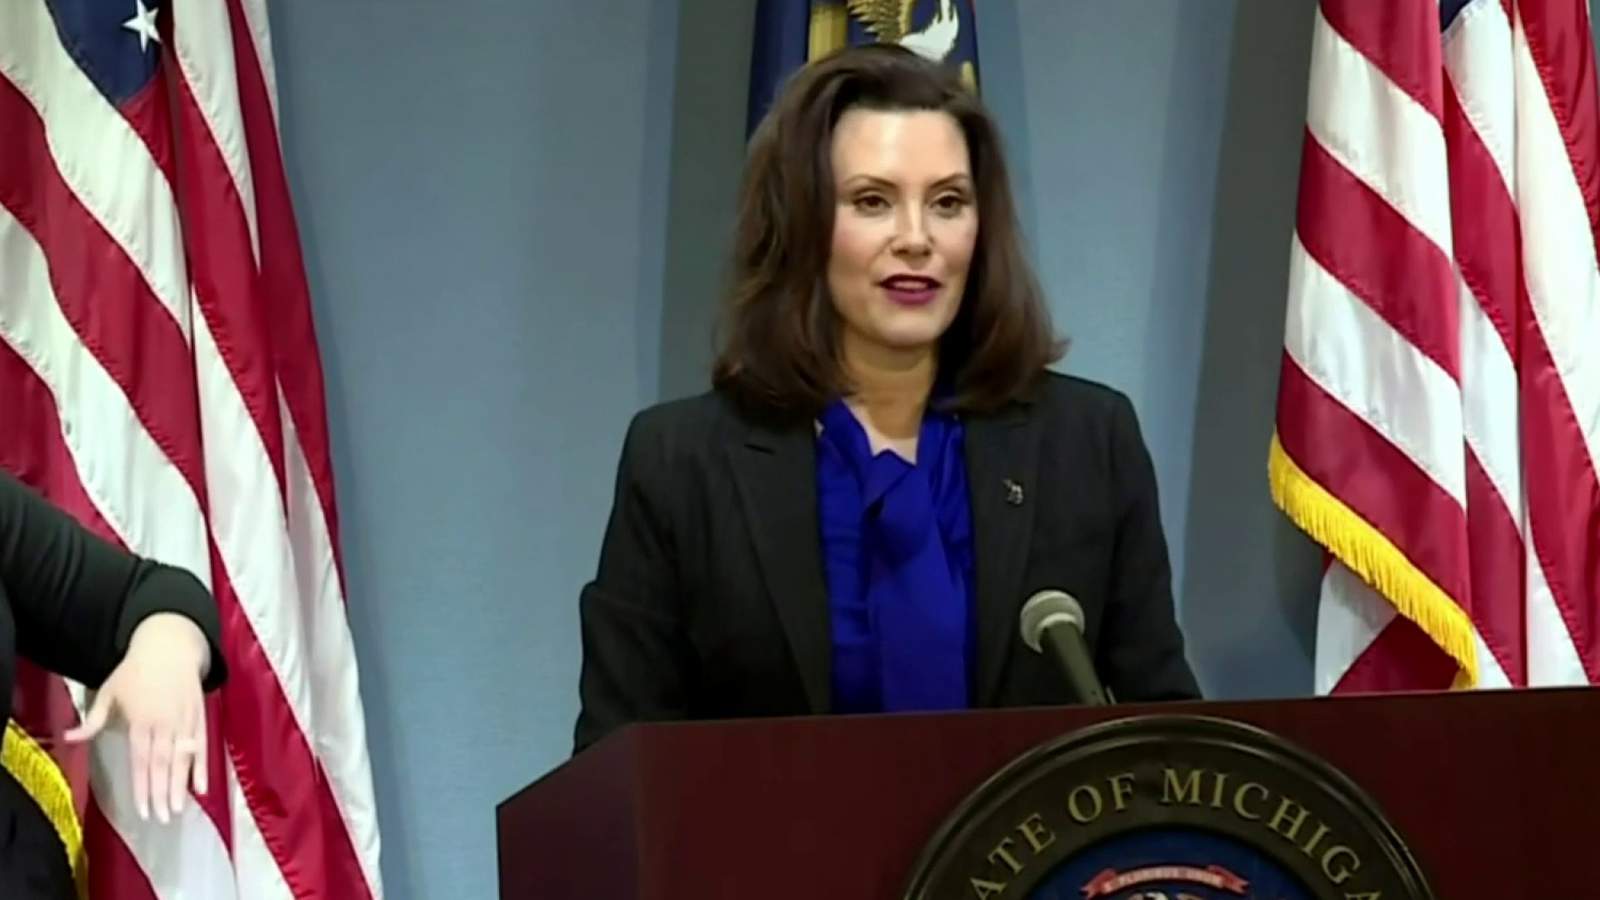 Gov. Whitmer extends Michigan State of Emergency through May 28 after Legislature refused extension